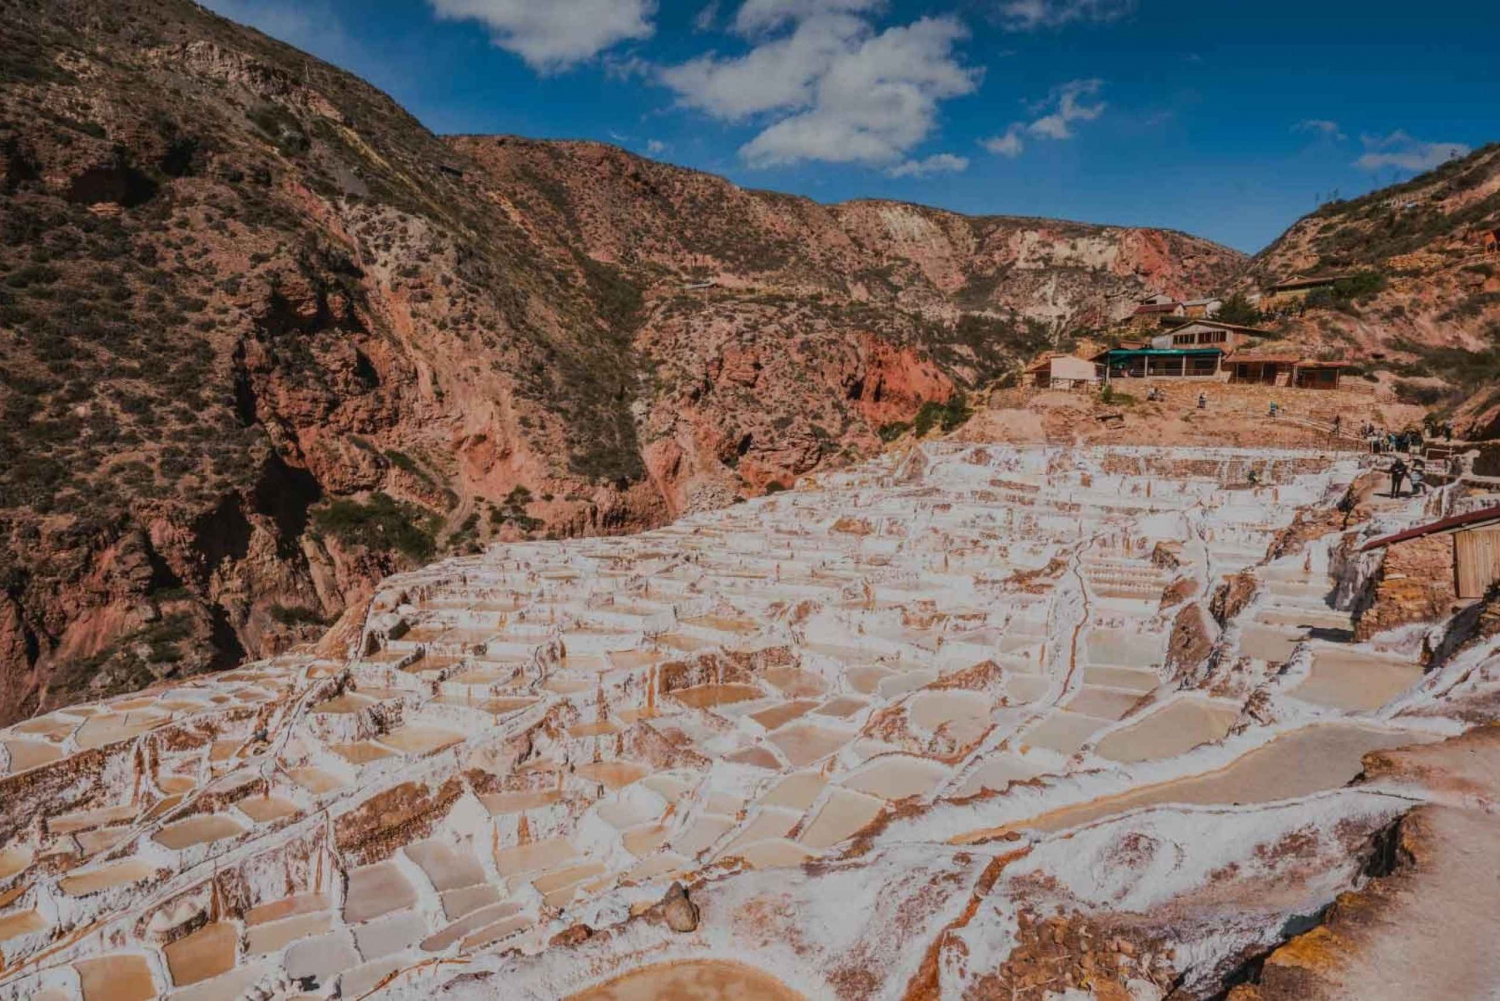 From Cusco: Guided tour in Sacred Valley and Maras Moray